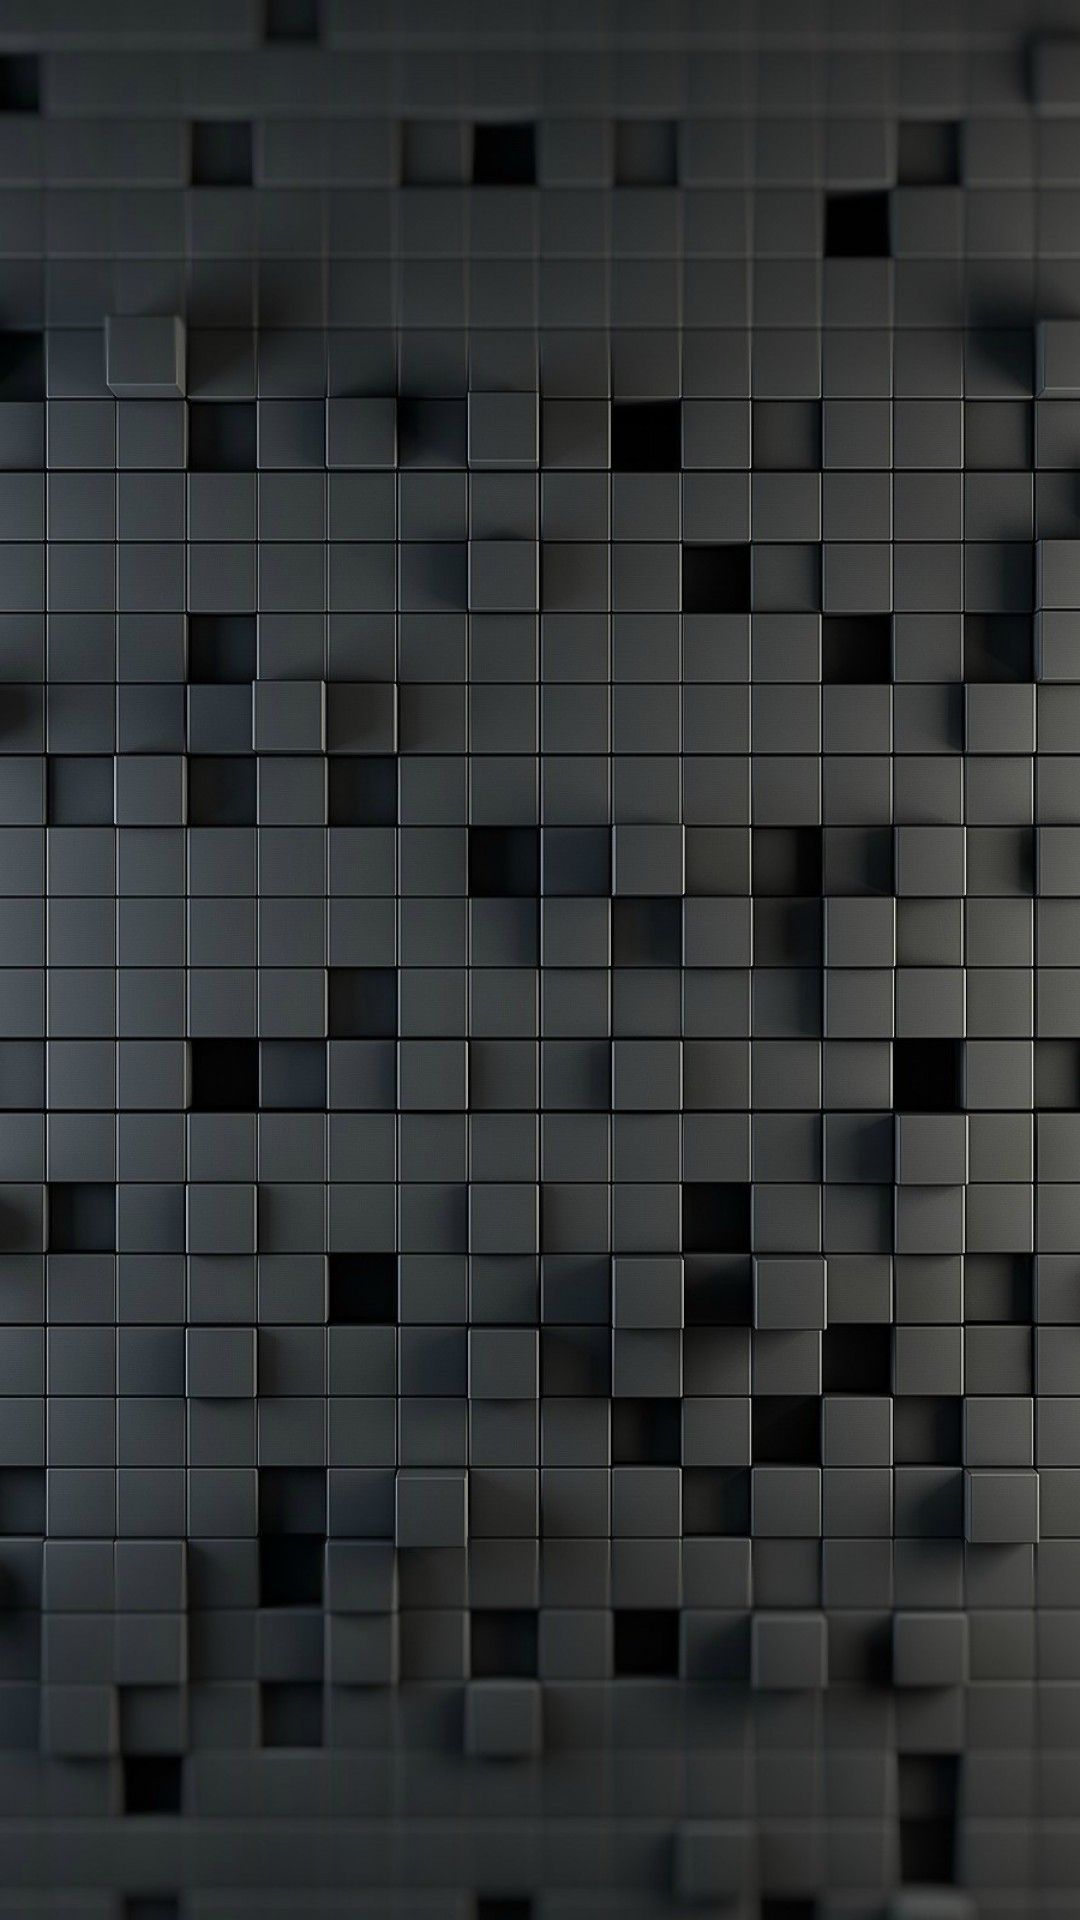 3D Abstract Grey Square Hd Wallpapers for Desktop and Mobiles iPhone 6 / 6S Plus